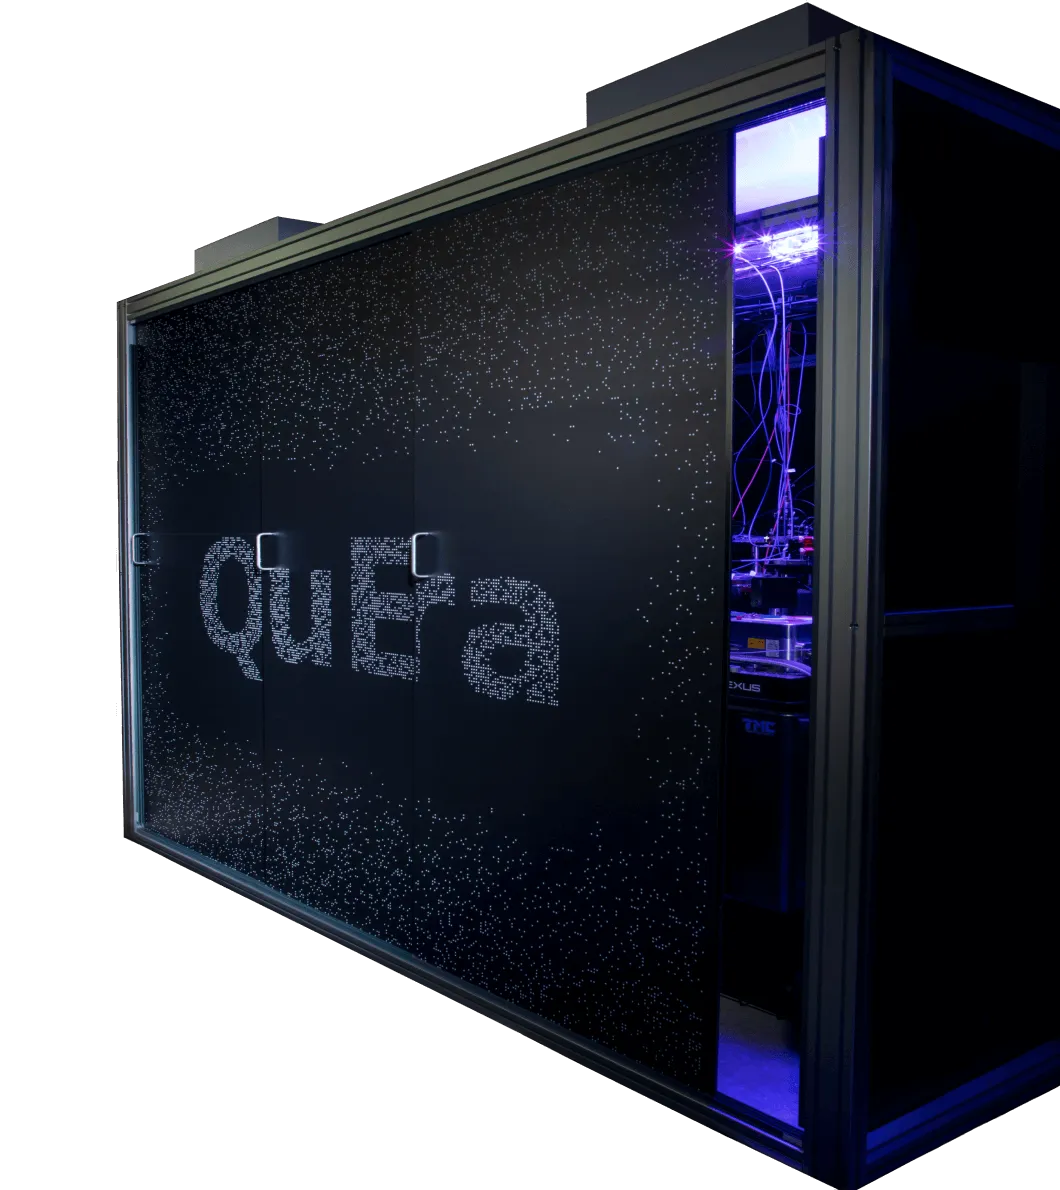 Quera To Construct World'S First Qubit Shuttling Testbed In Uk, Boosting Quantum Industry